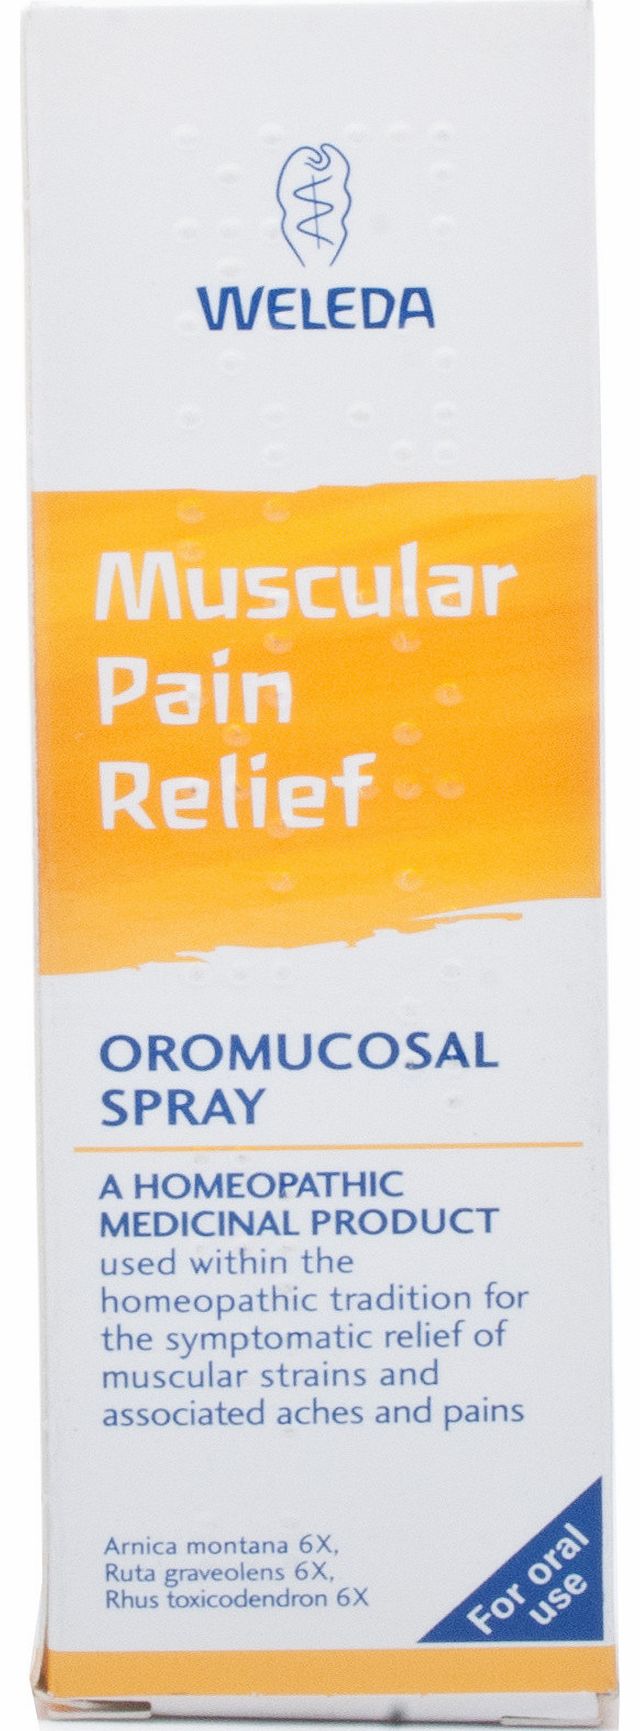 Muscular Pain Relief Oral Spray